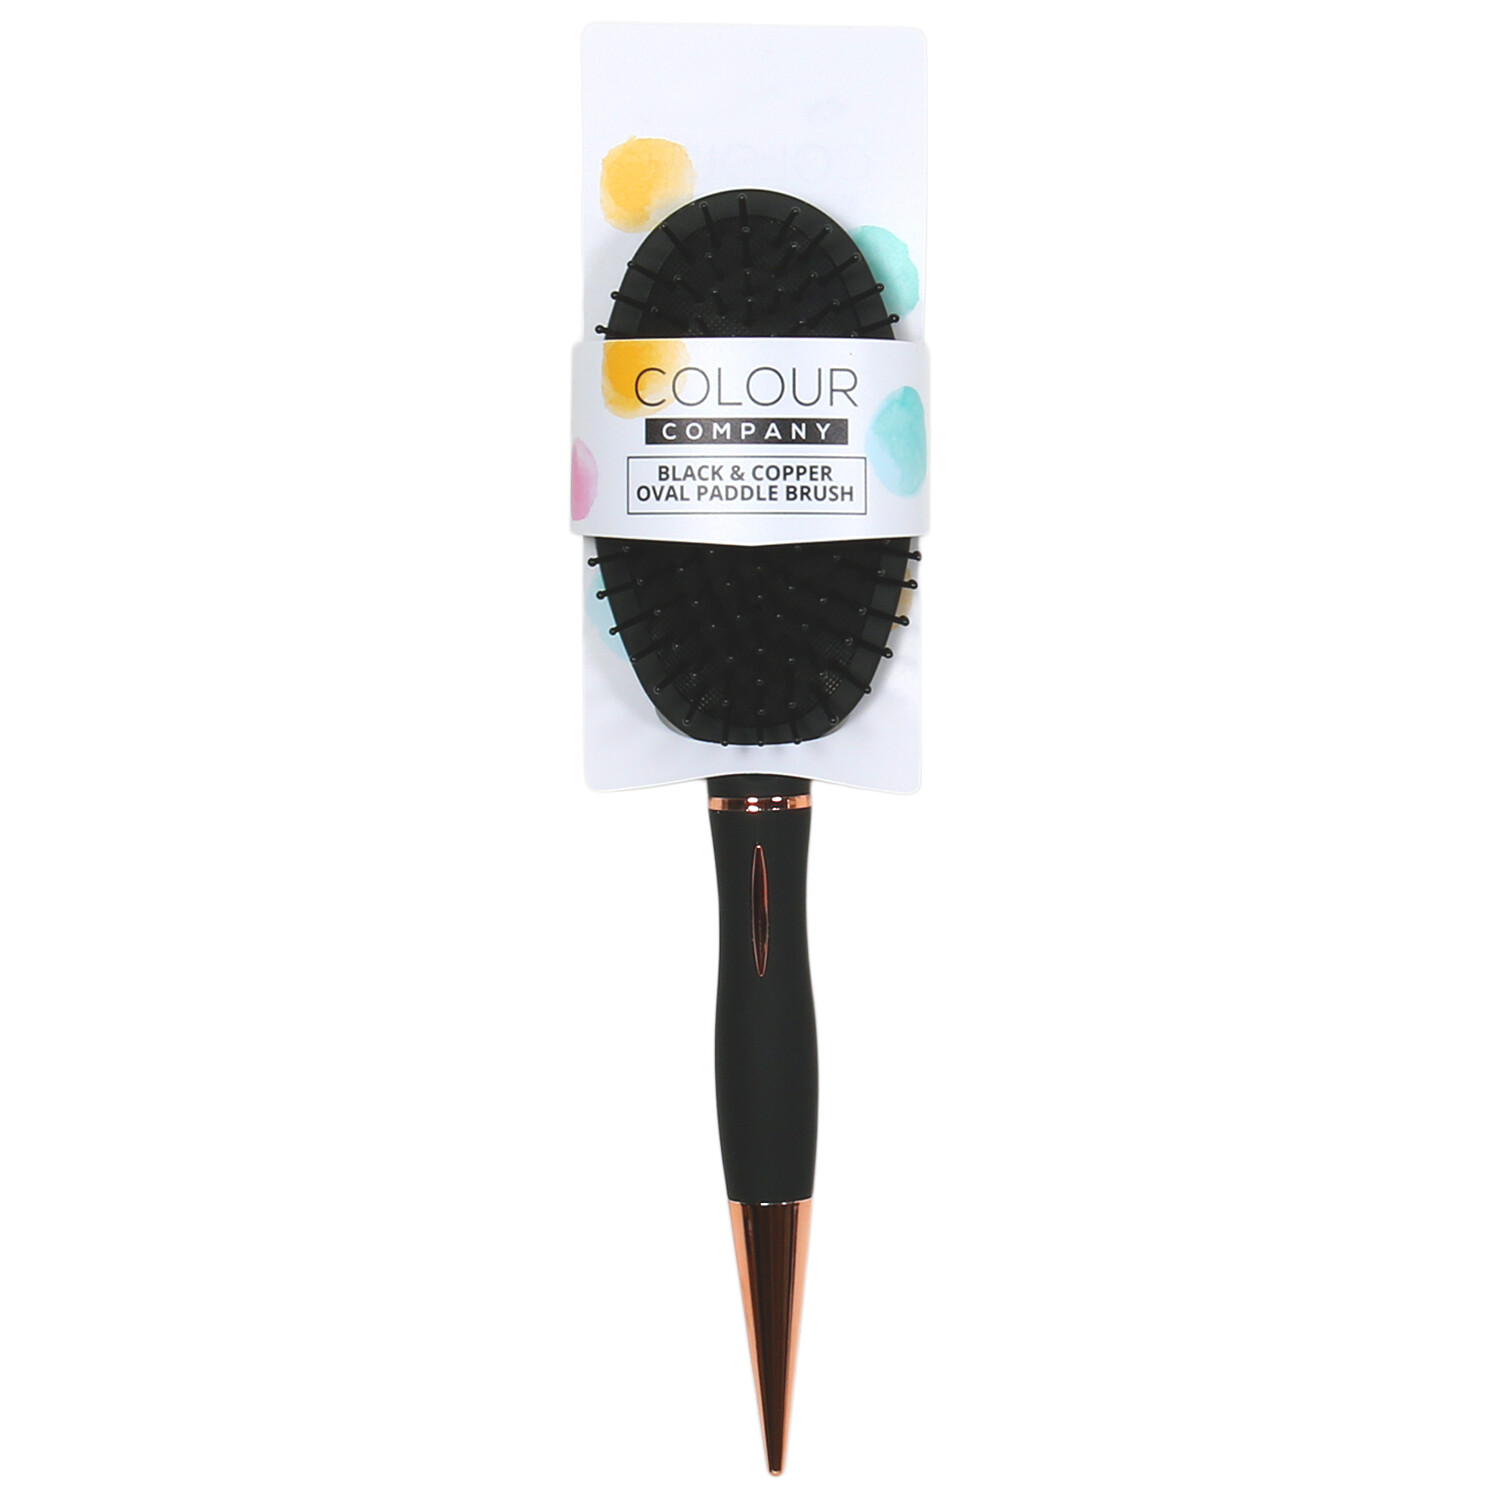 Black and Copper Oval Paddle Brush Image